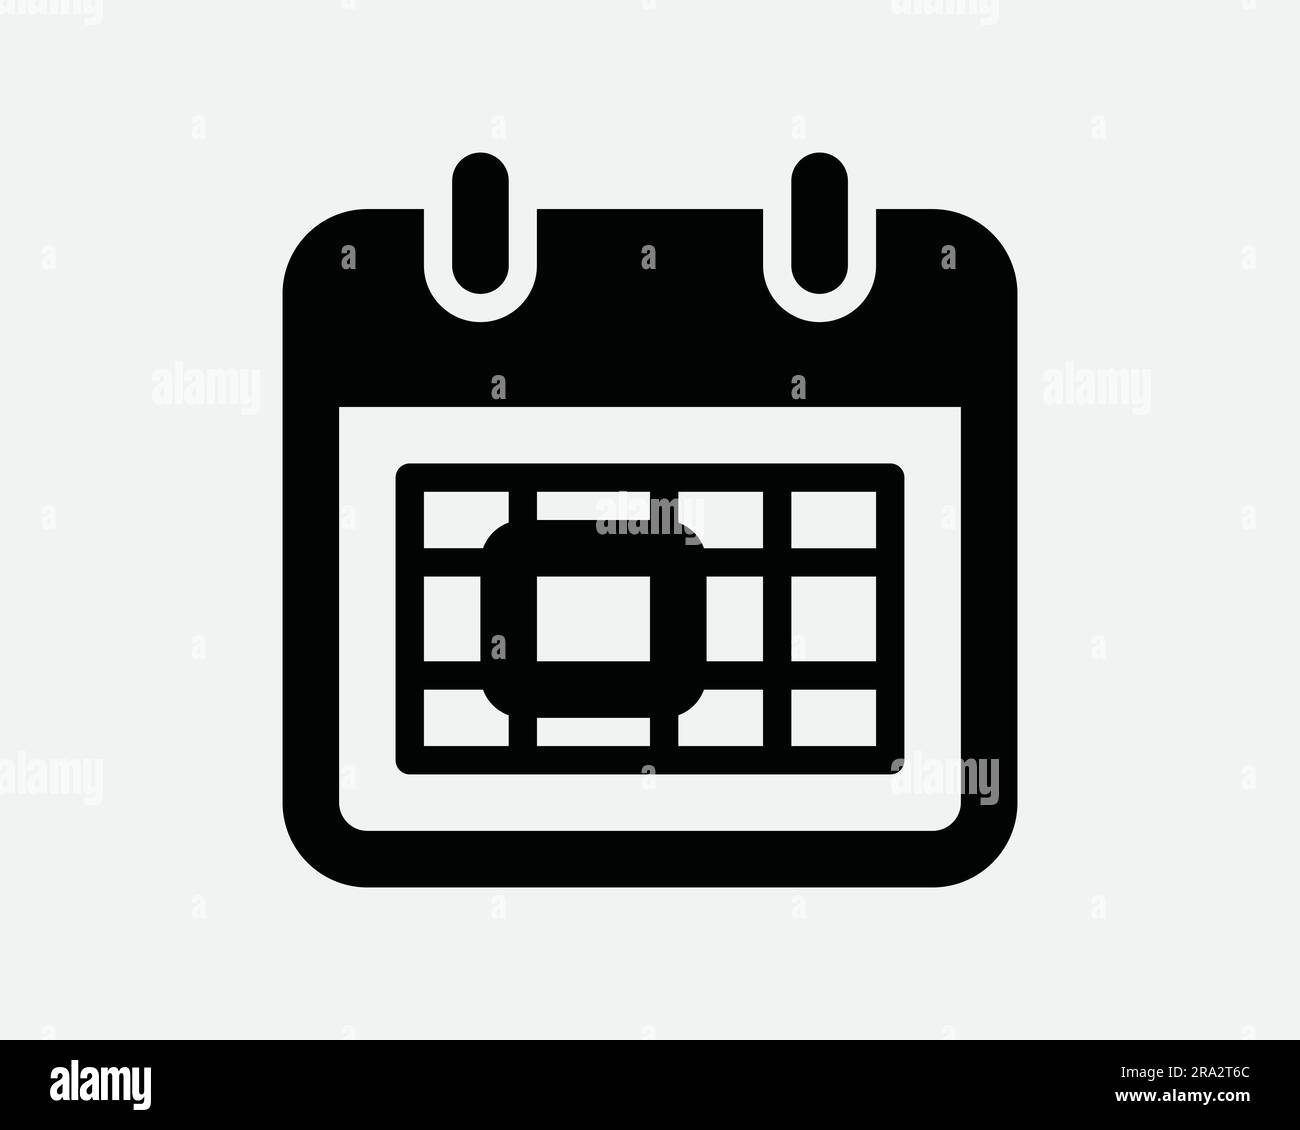 Calendar Deadline Icon. Year Month Day Planner Schedule Date Reminder Appointment Agenda Black White Graphic Clipart Artwork Symbol Sign Vector EPS Stock Vector